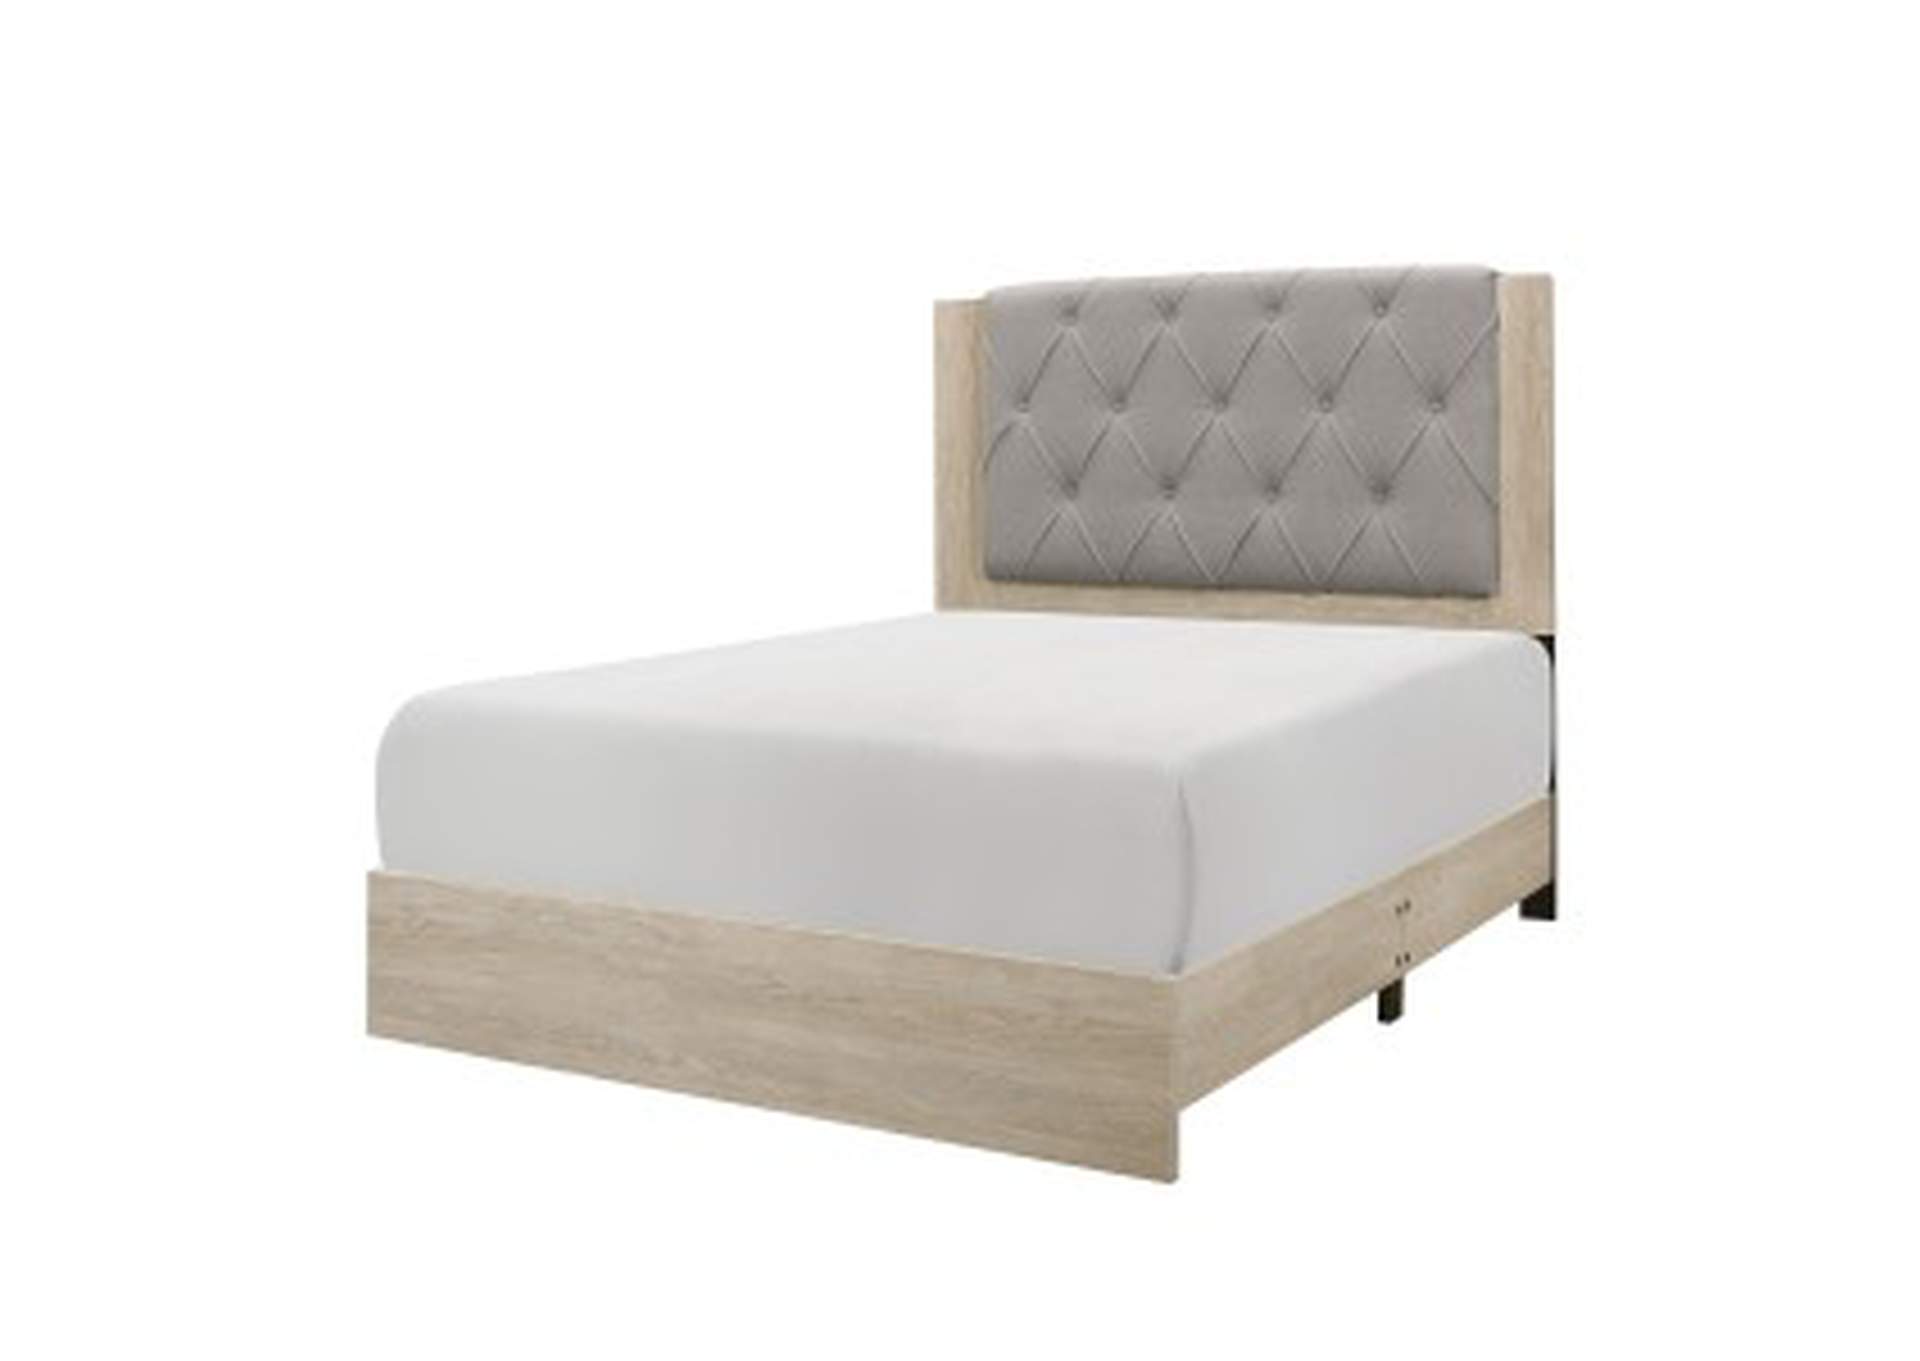 Whiting Eastern King Bed In A Box,Homelegance